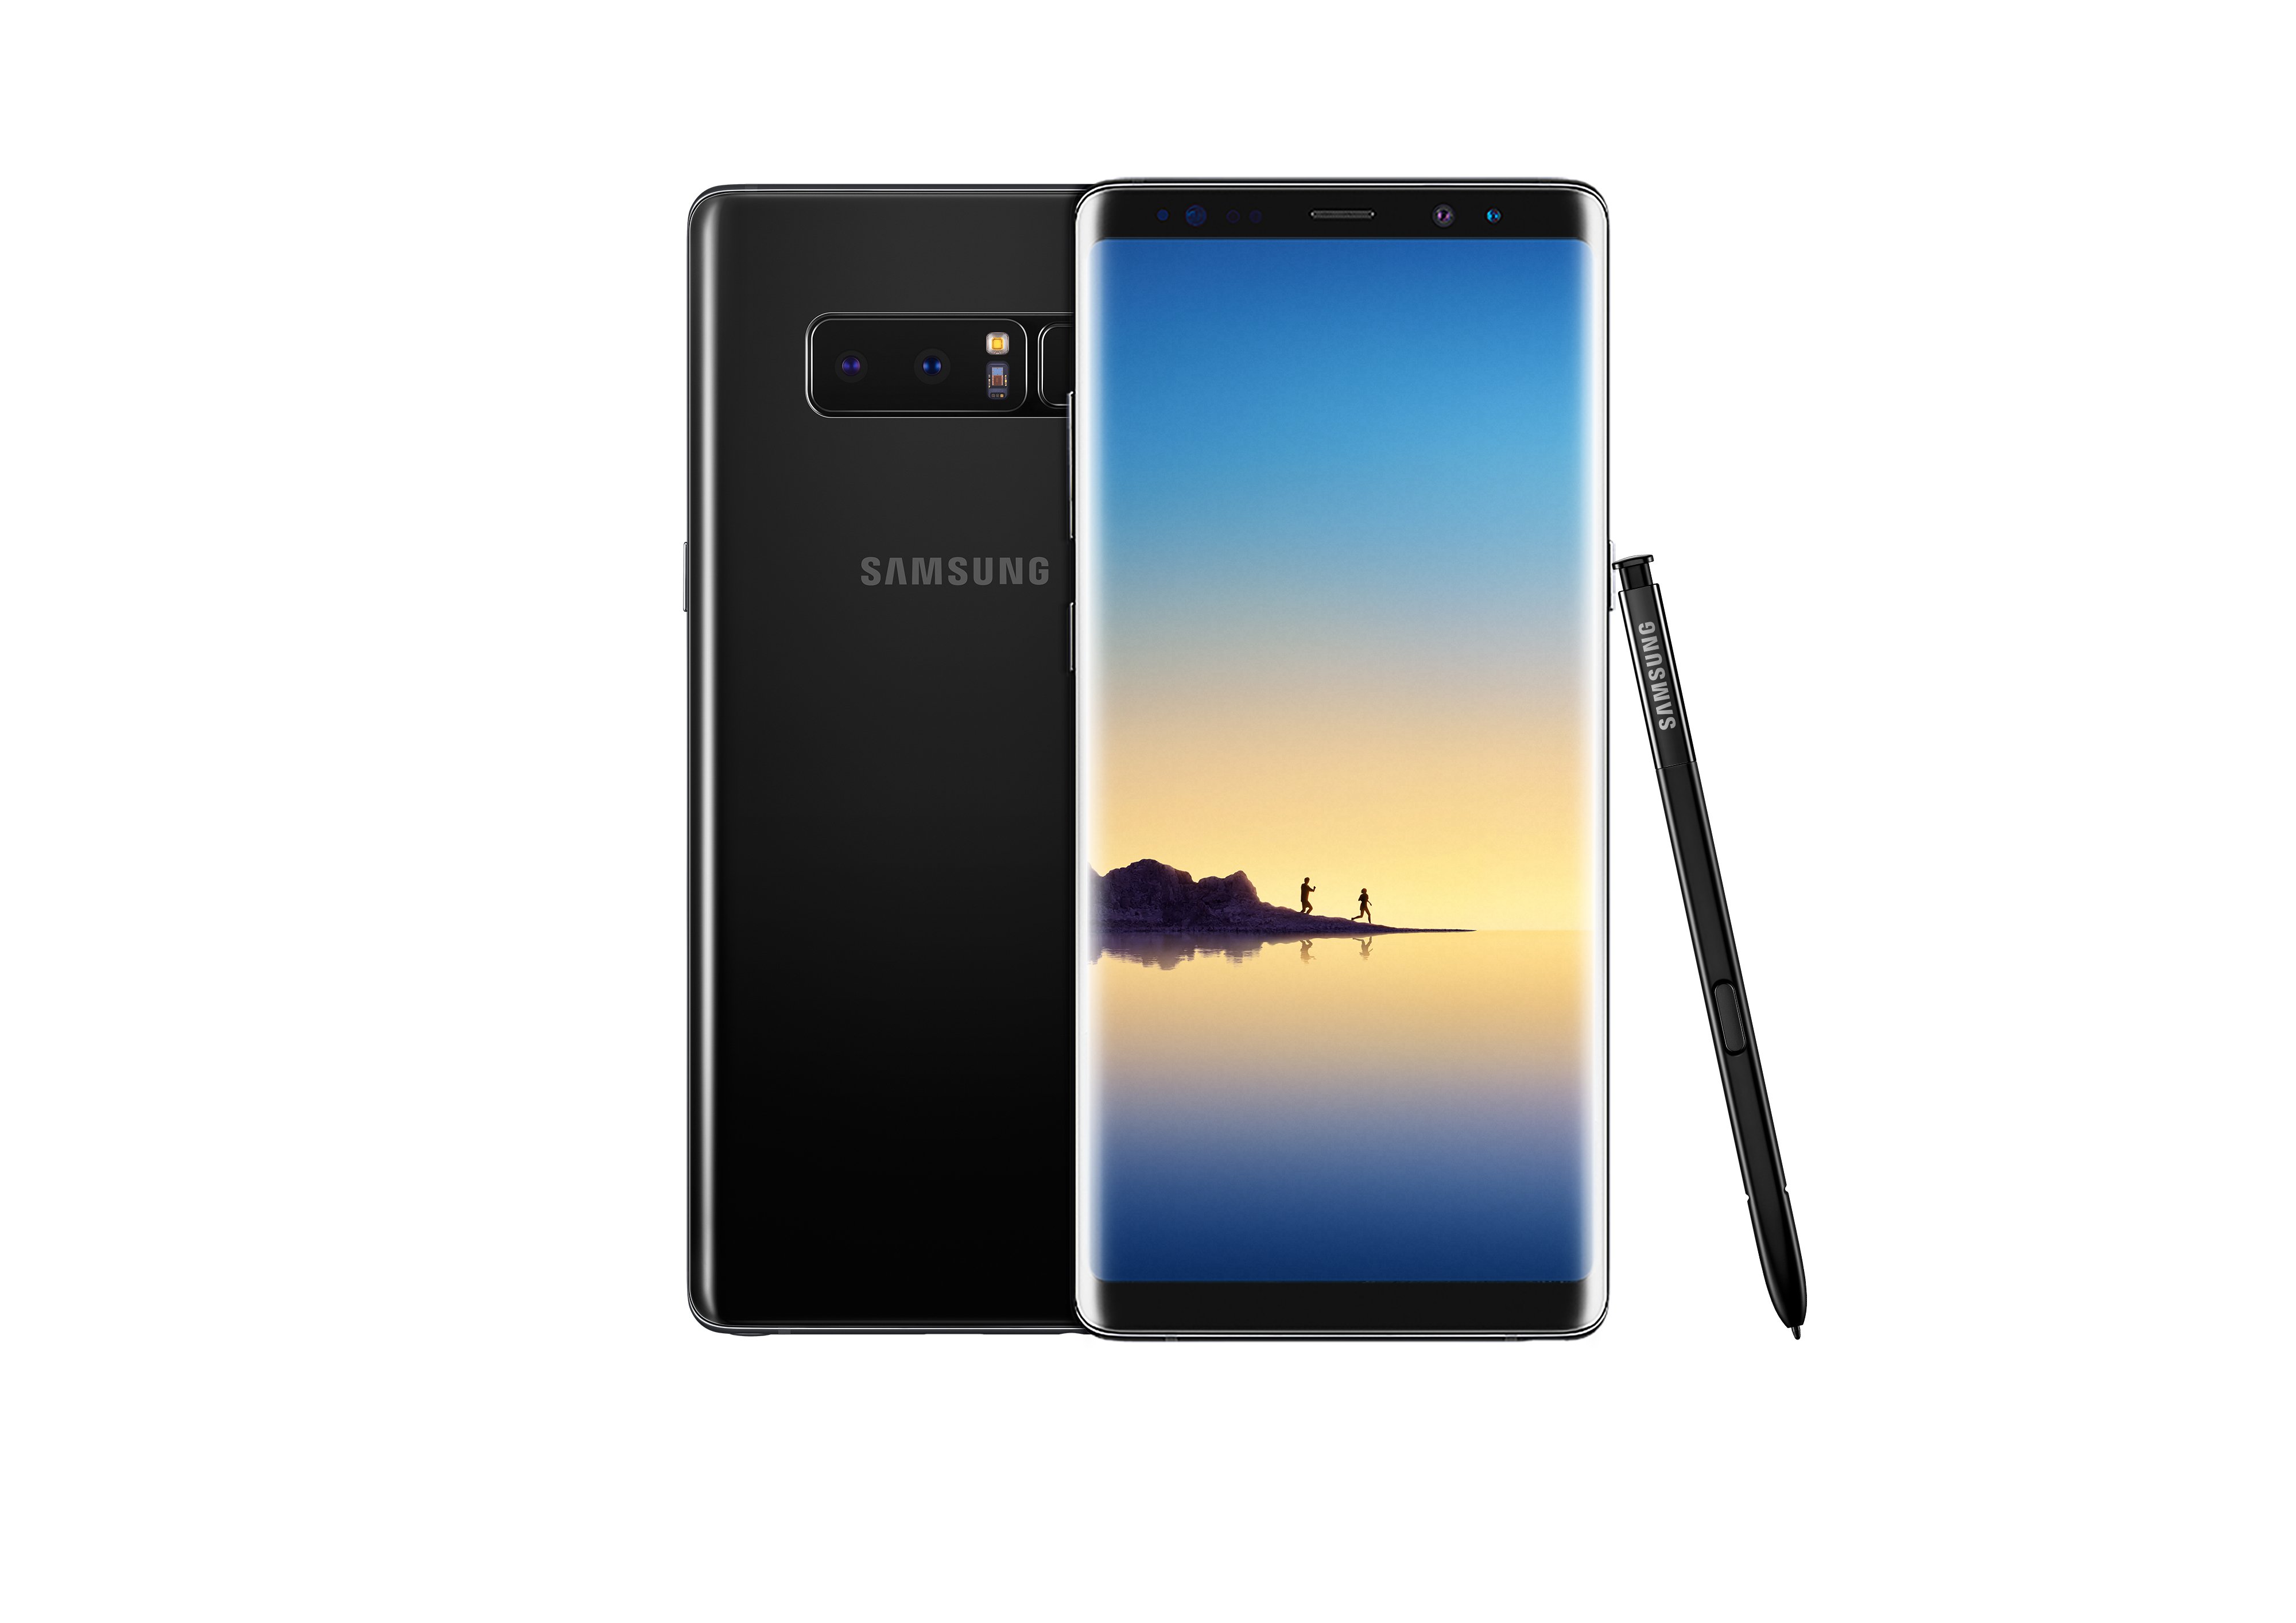 Galaxy Note8 Midnight Black Dual1 Samsung Galaxy Note 8 Is Fourth Phone To Support Netflix HDR